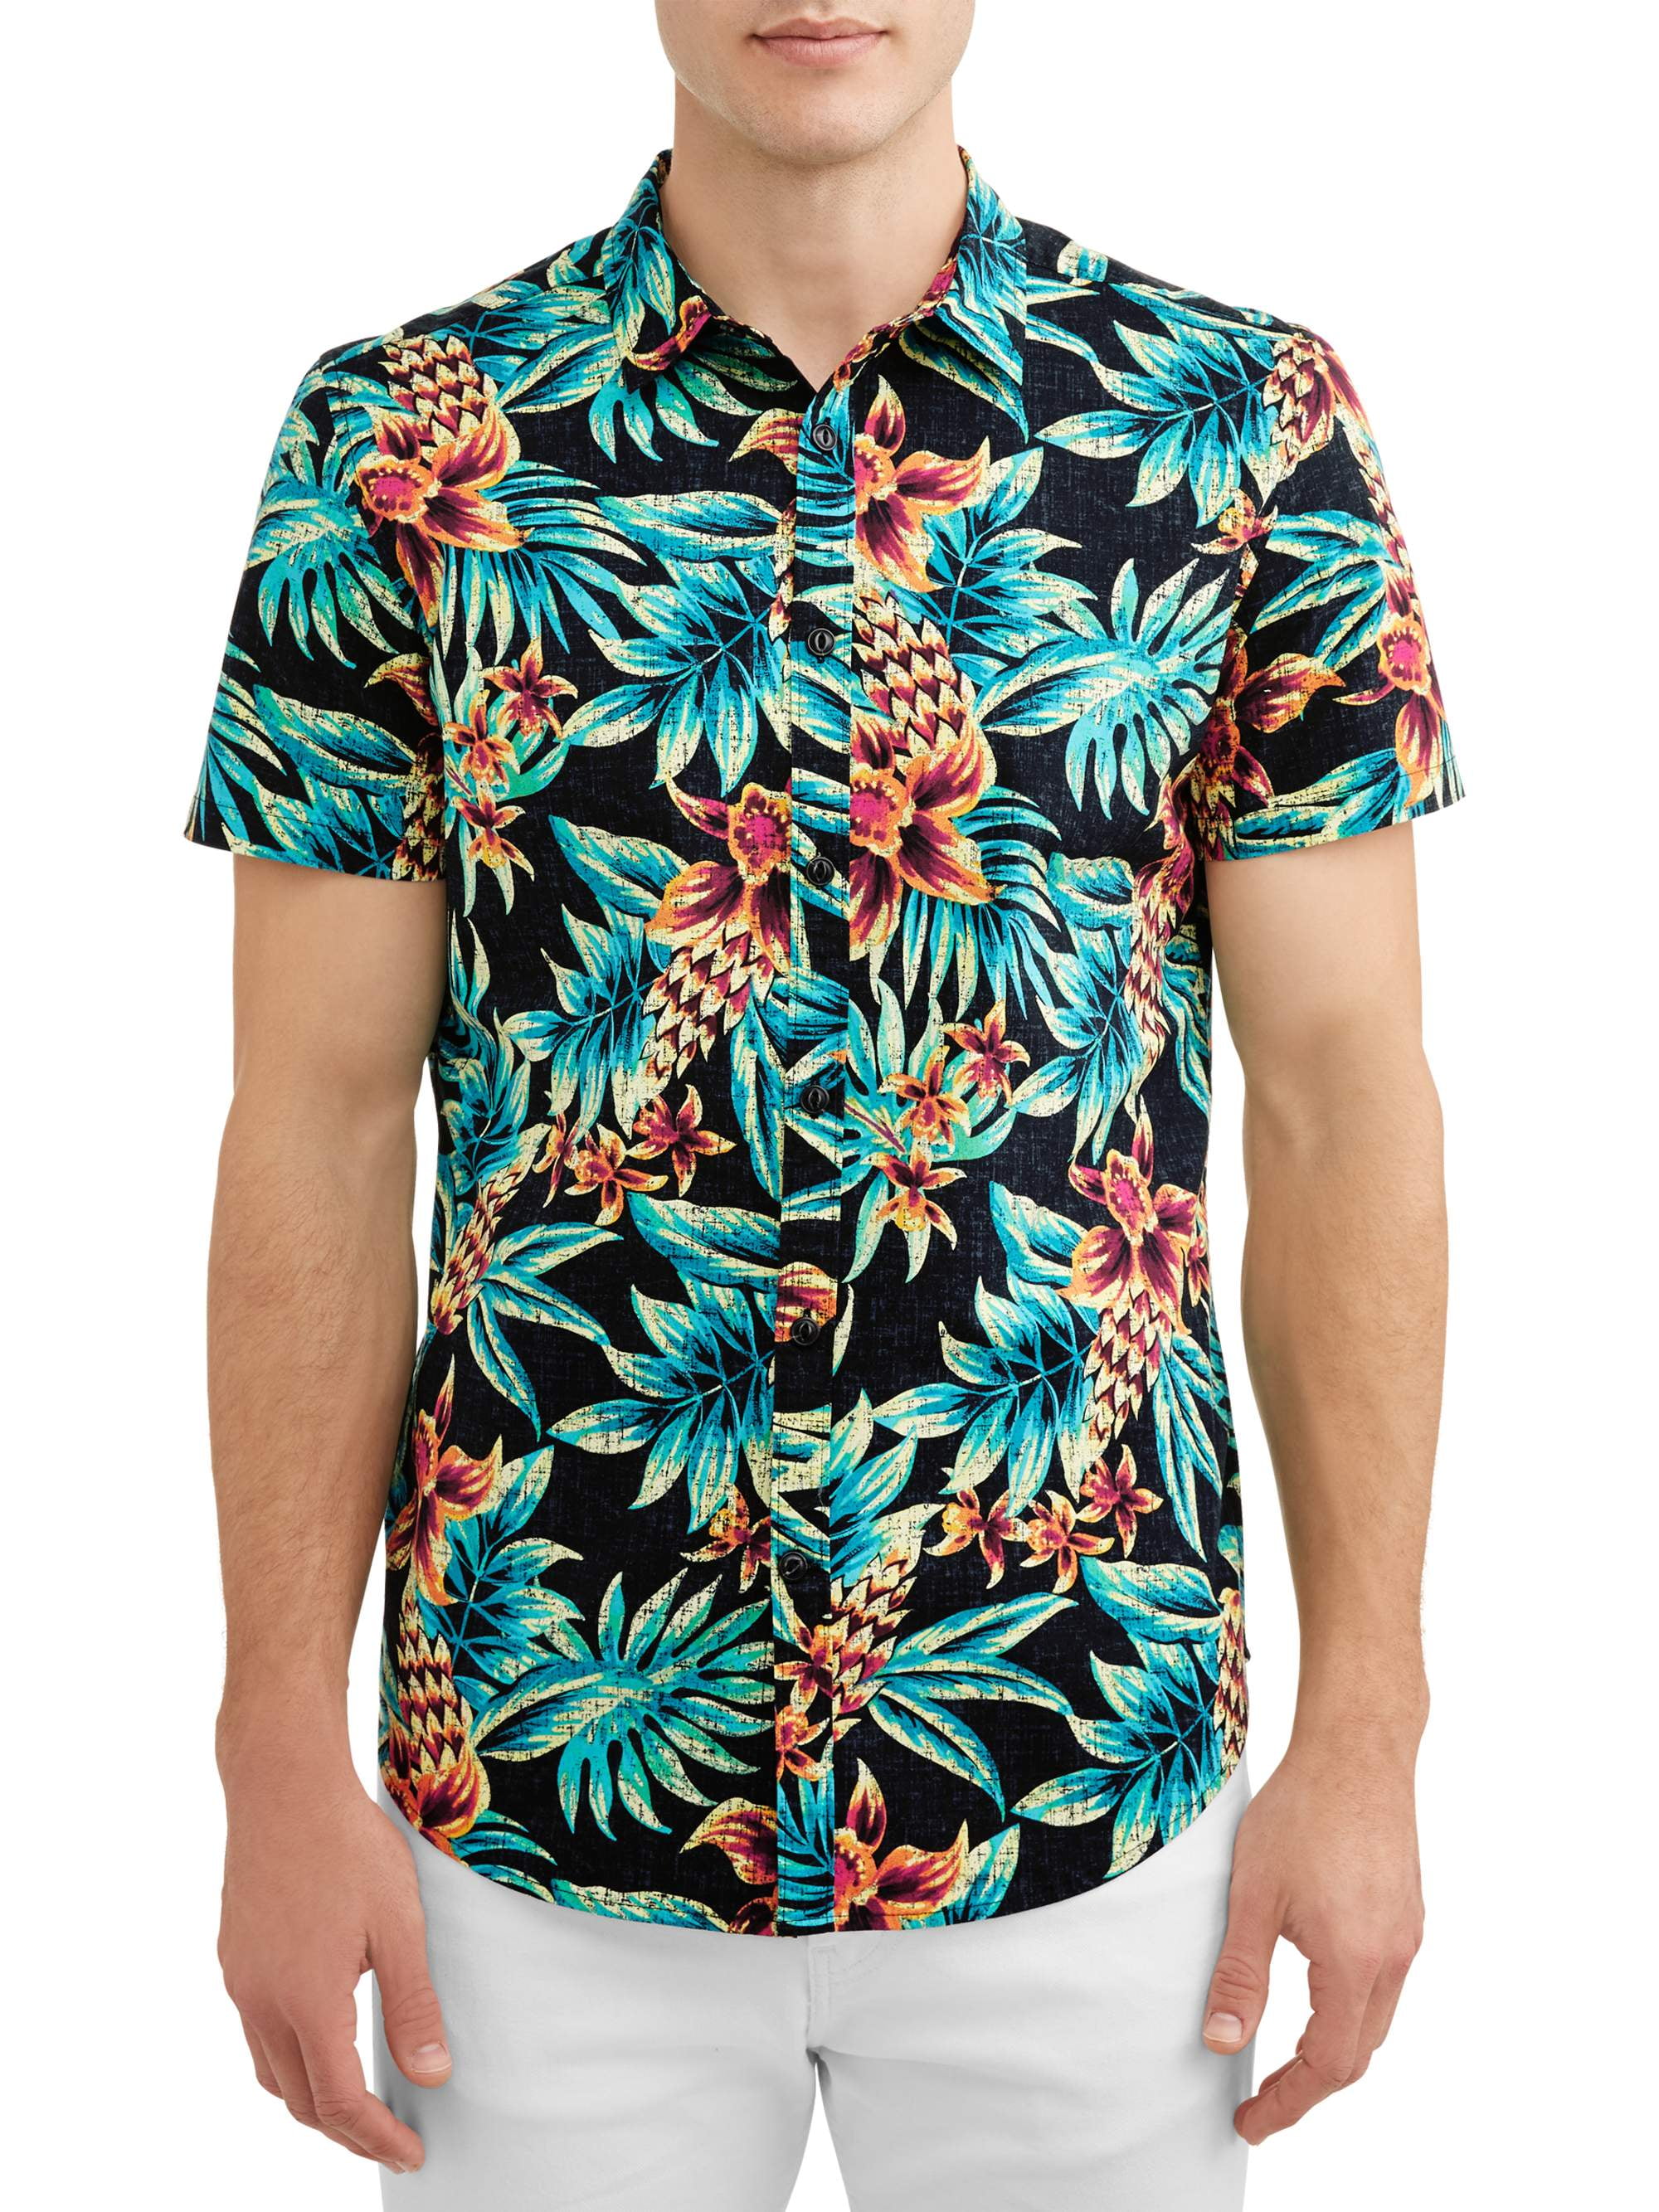 George Young Men's short sleeve Printed Shirt, up to size 3XL - Walmart.com